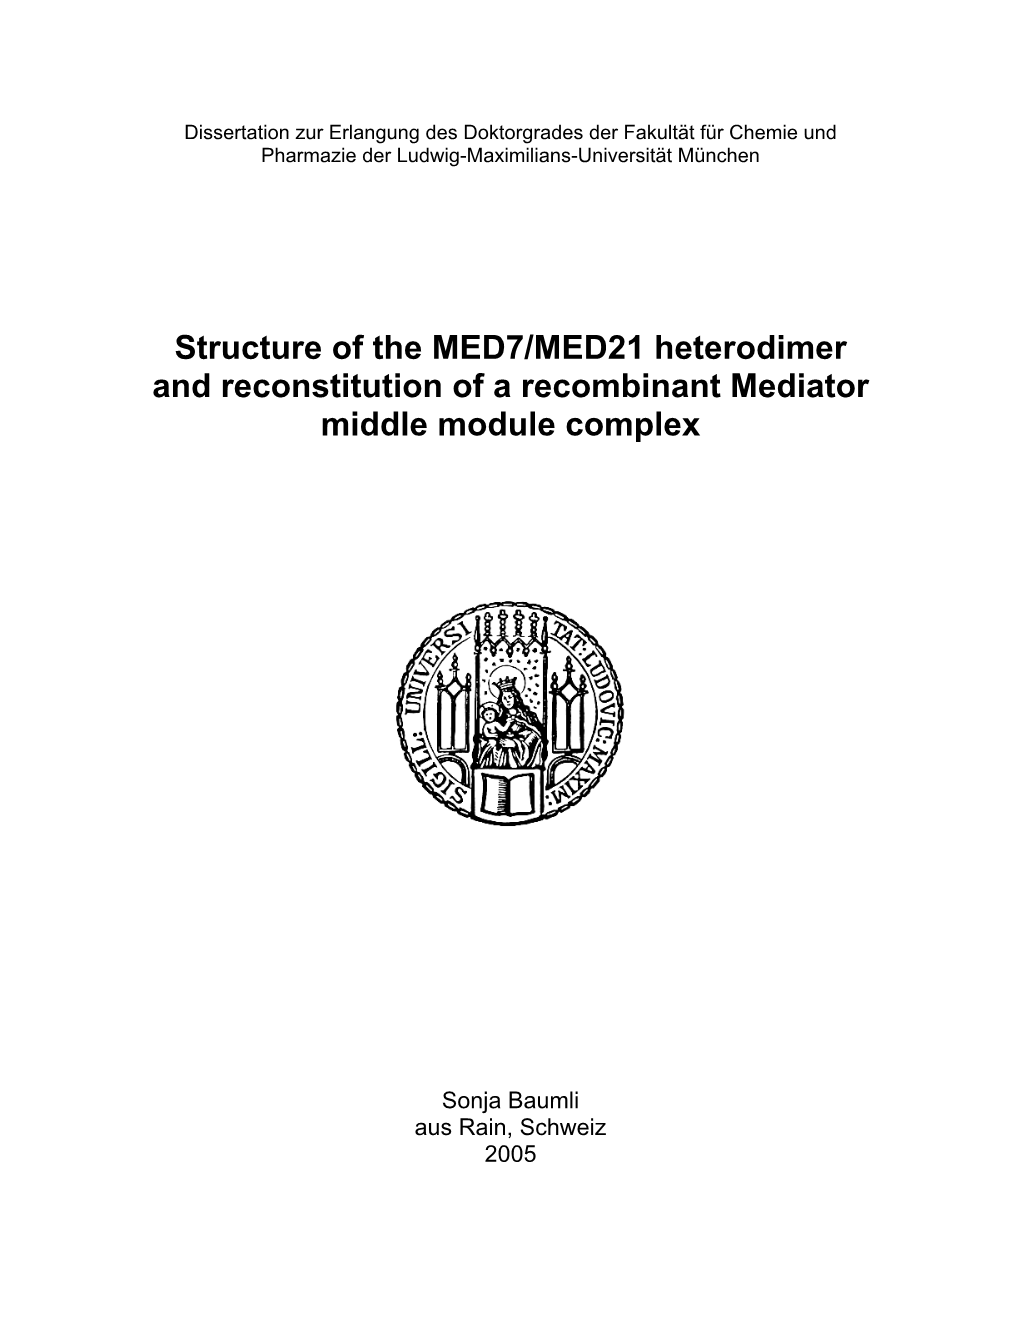 Structure of the MED7/MED21 Heterodimer and Reconstitution of a Recombinant Mediator Middle Module Complex